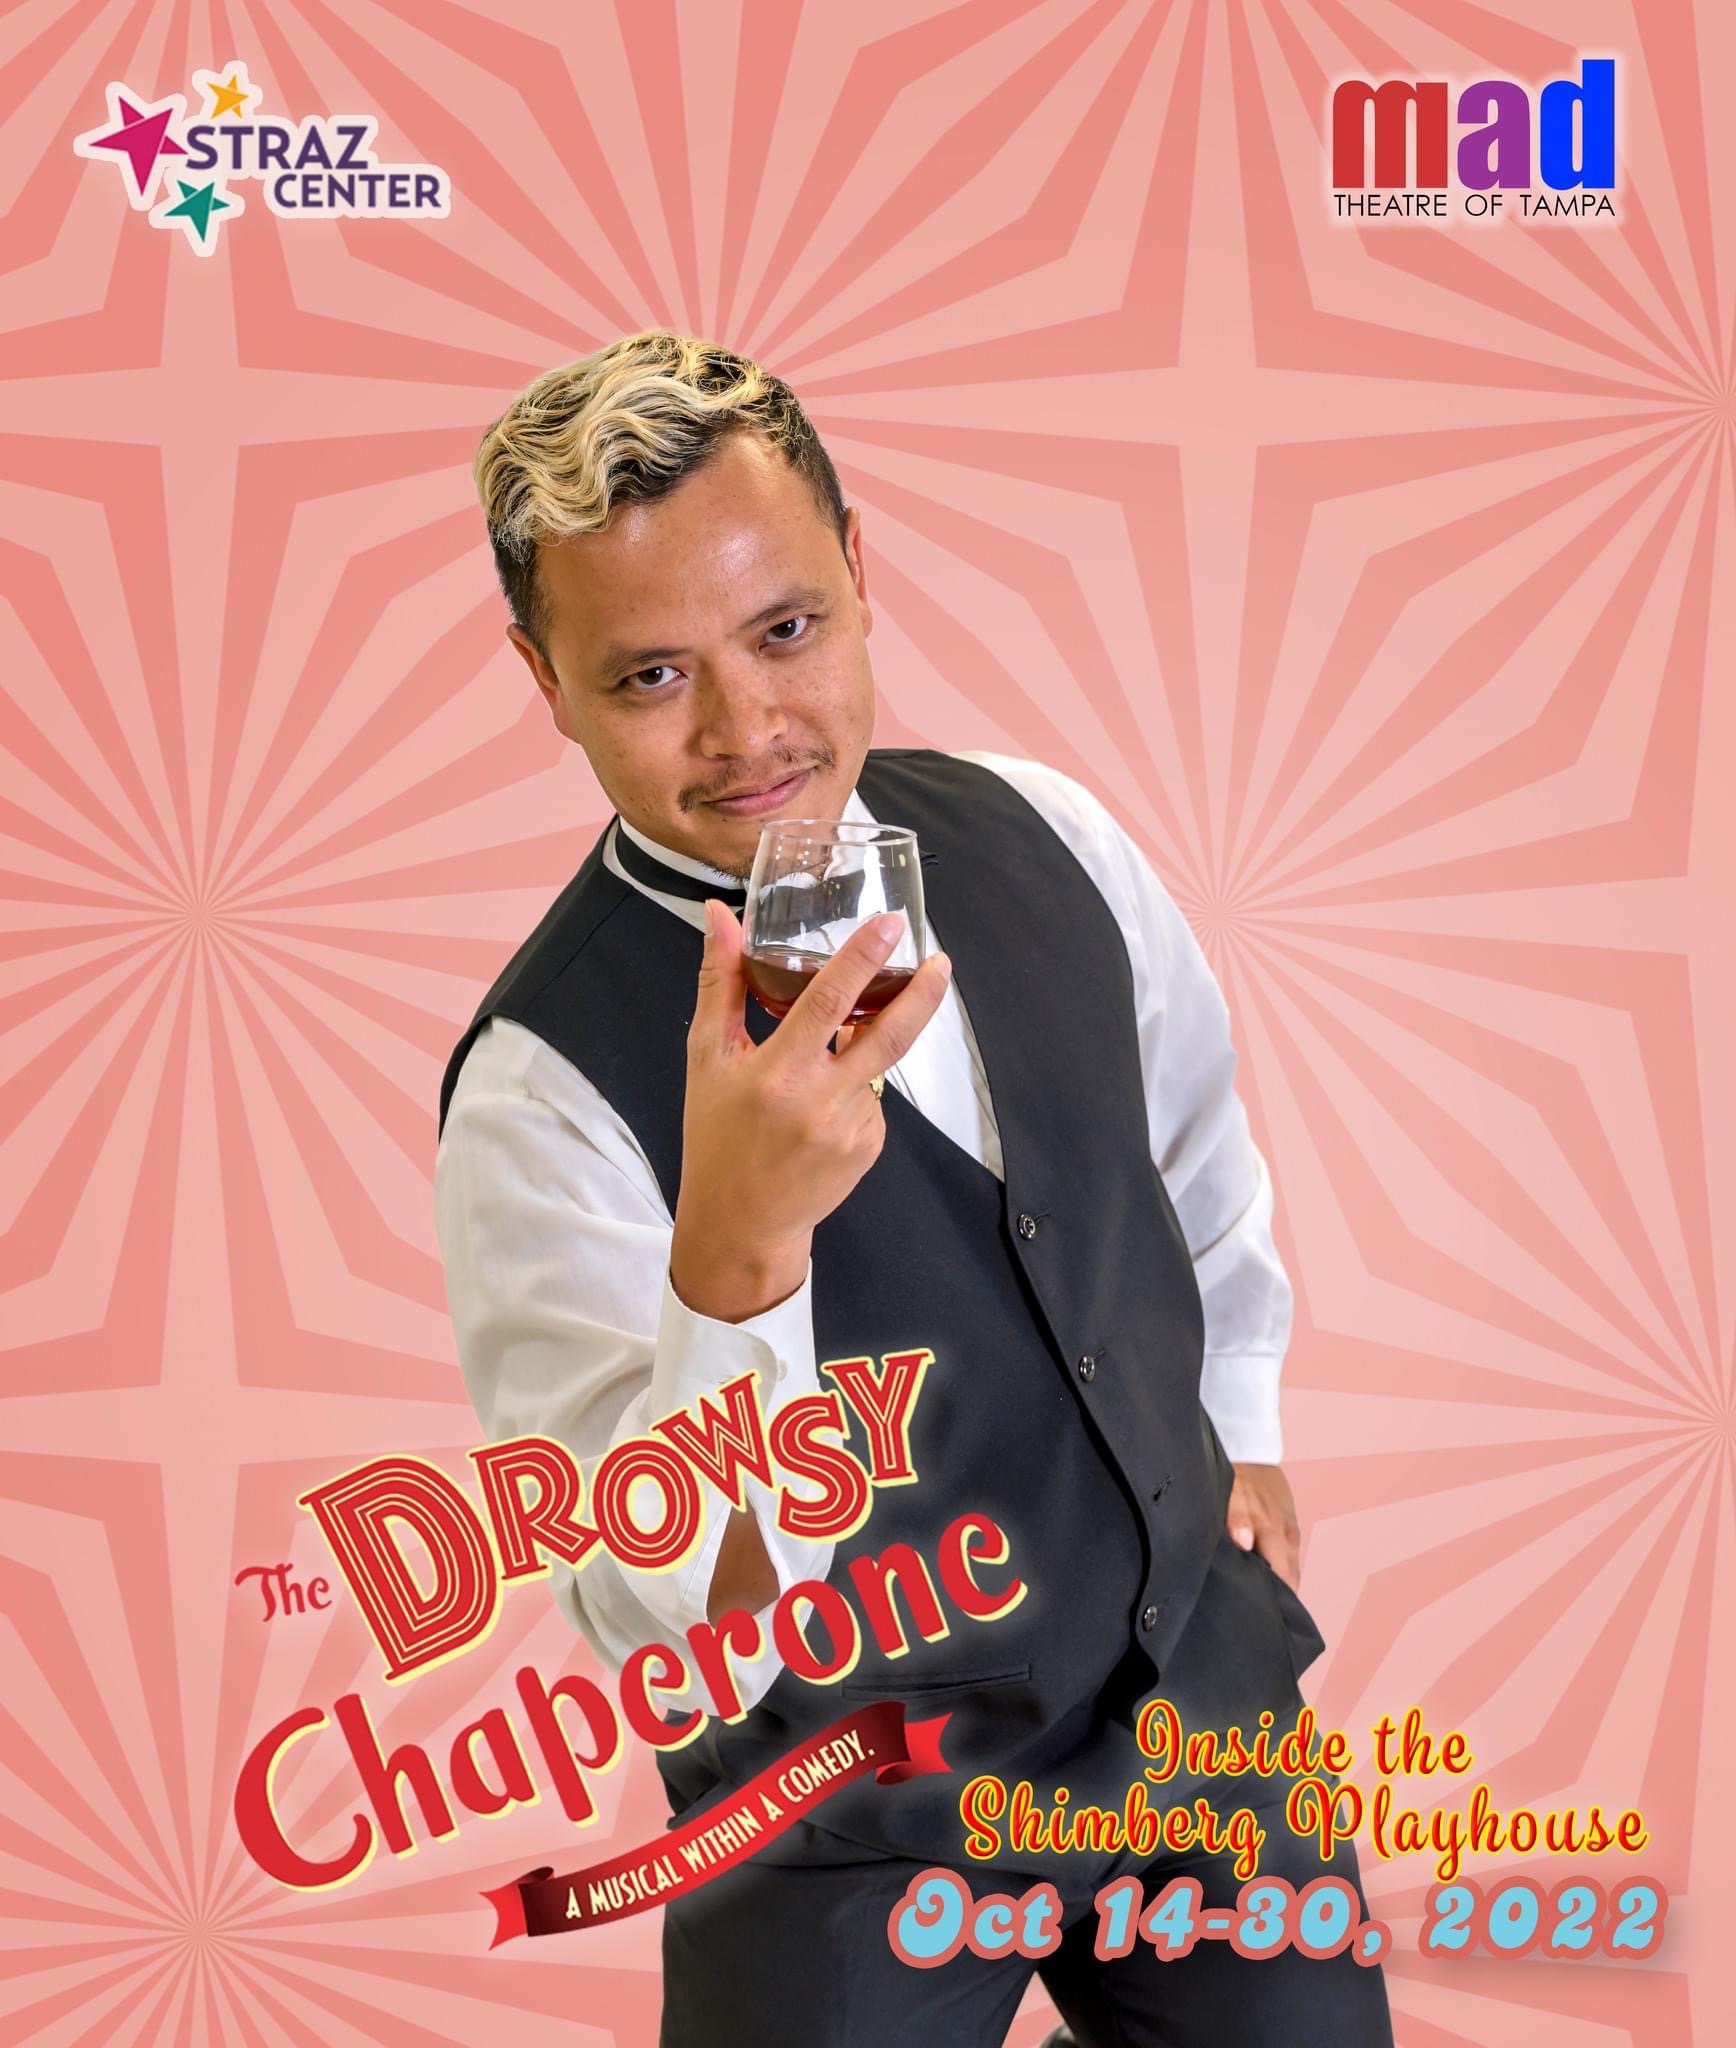 Meet Edgar as played by Topher Larkin in mad Theatre of Tampa’s “The Drowsy Chaperone